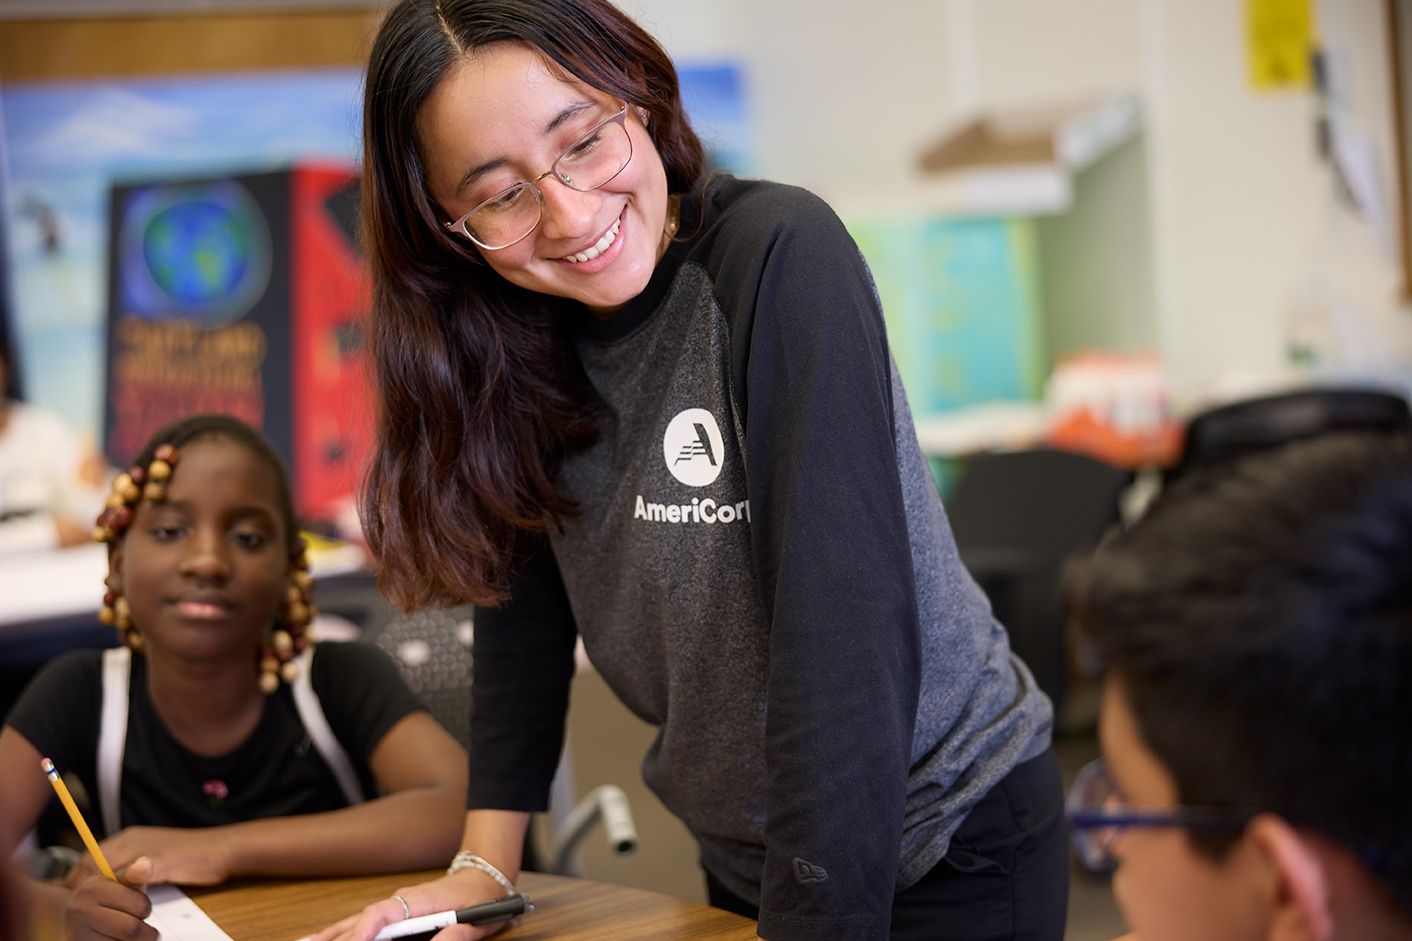 An Americorps member chats with students in a classroom.